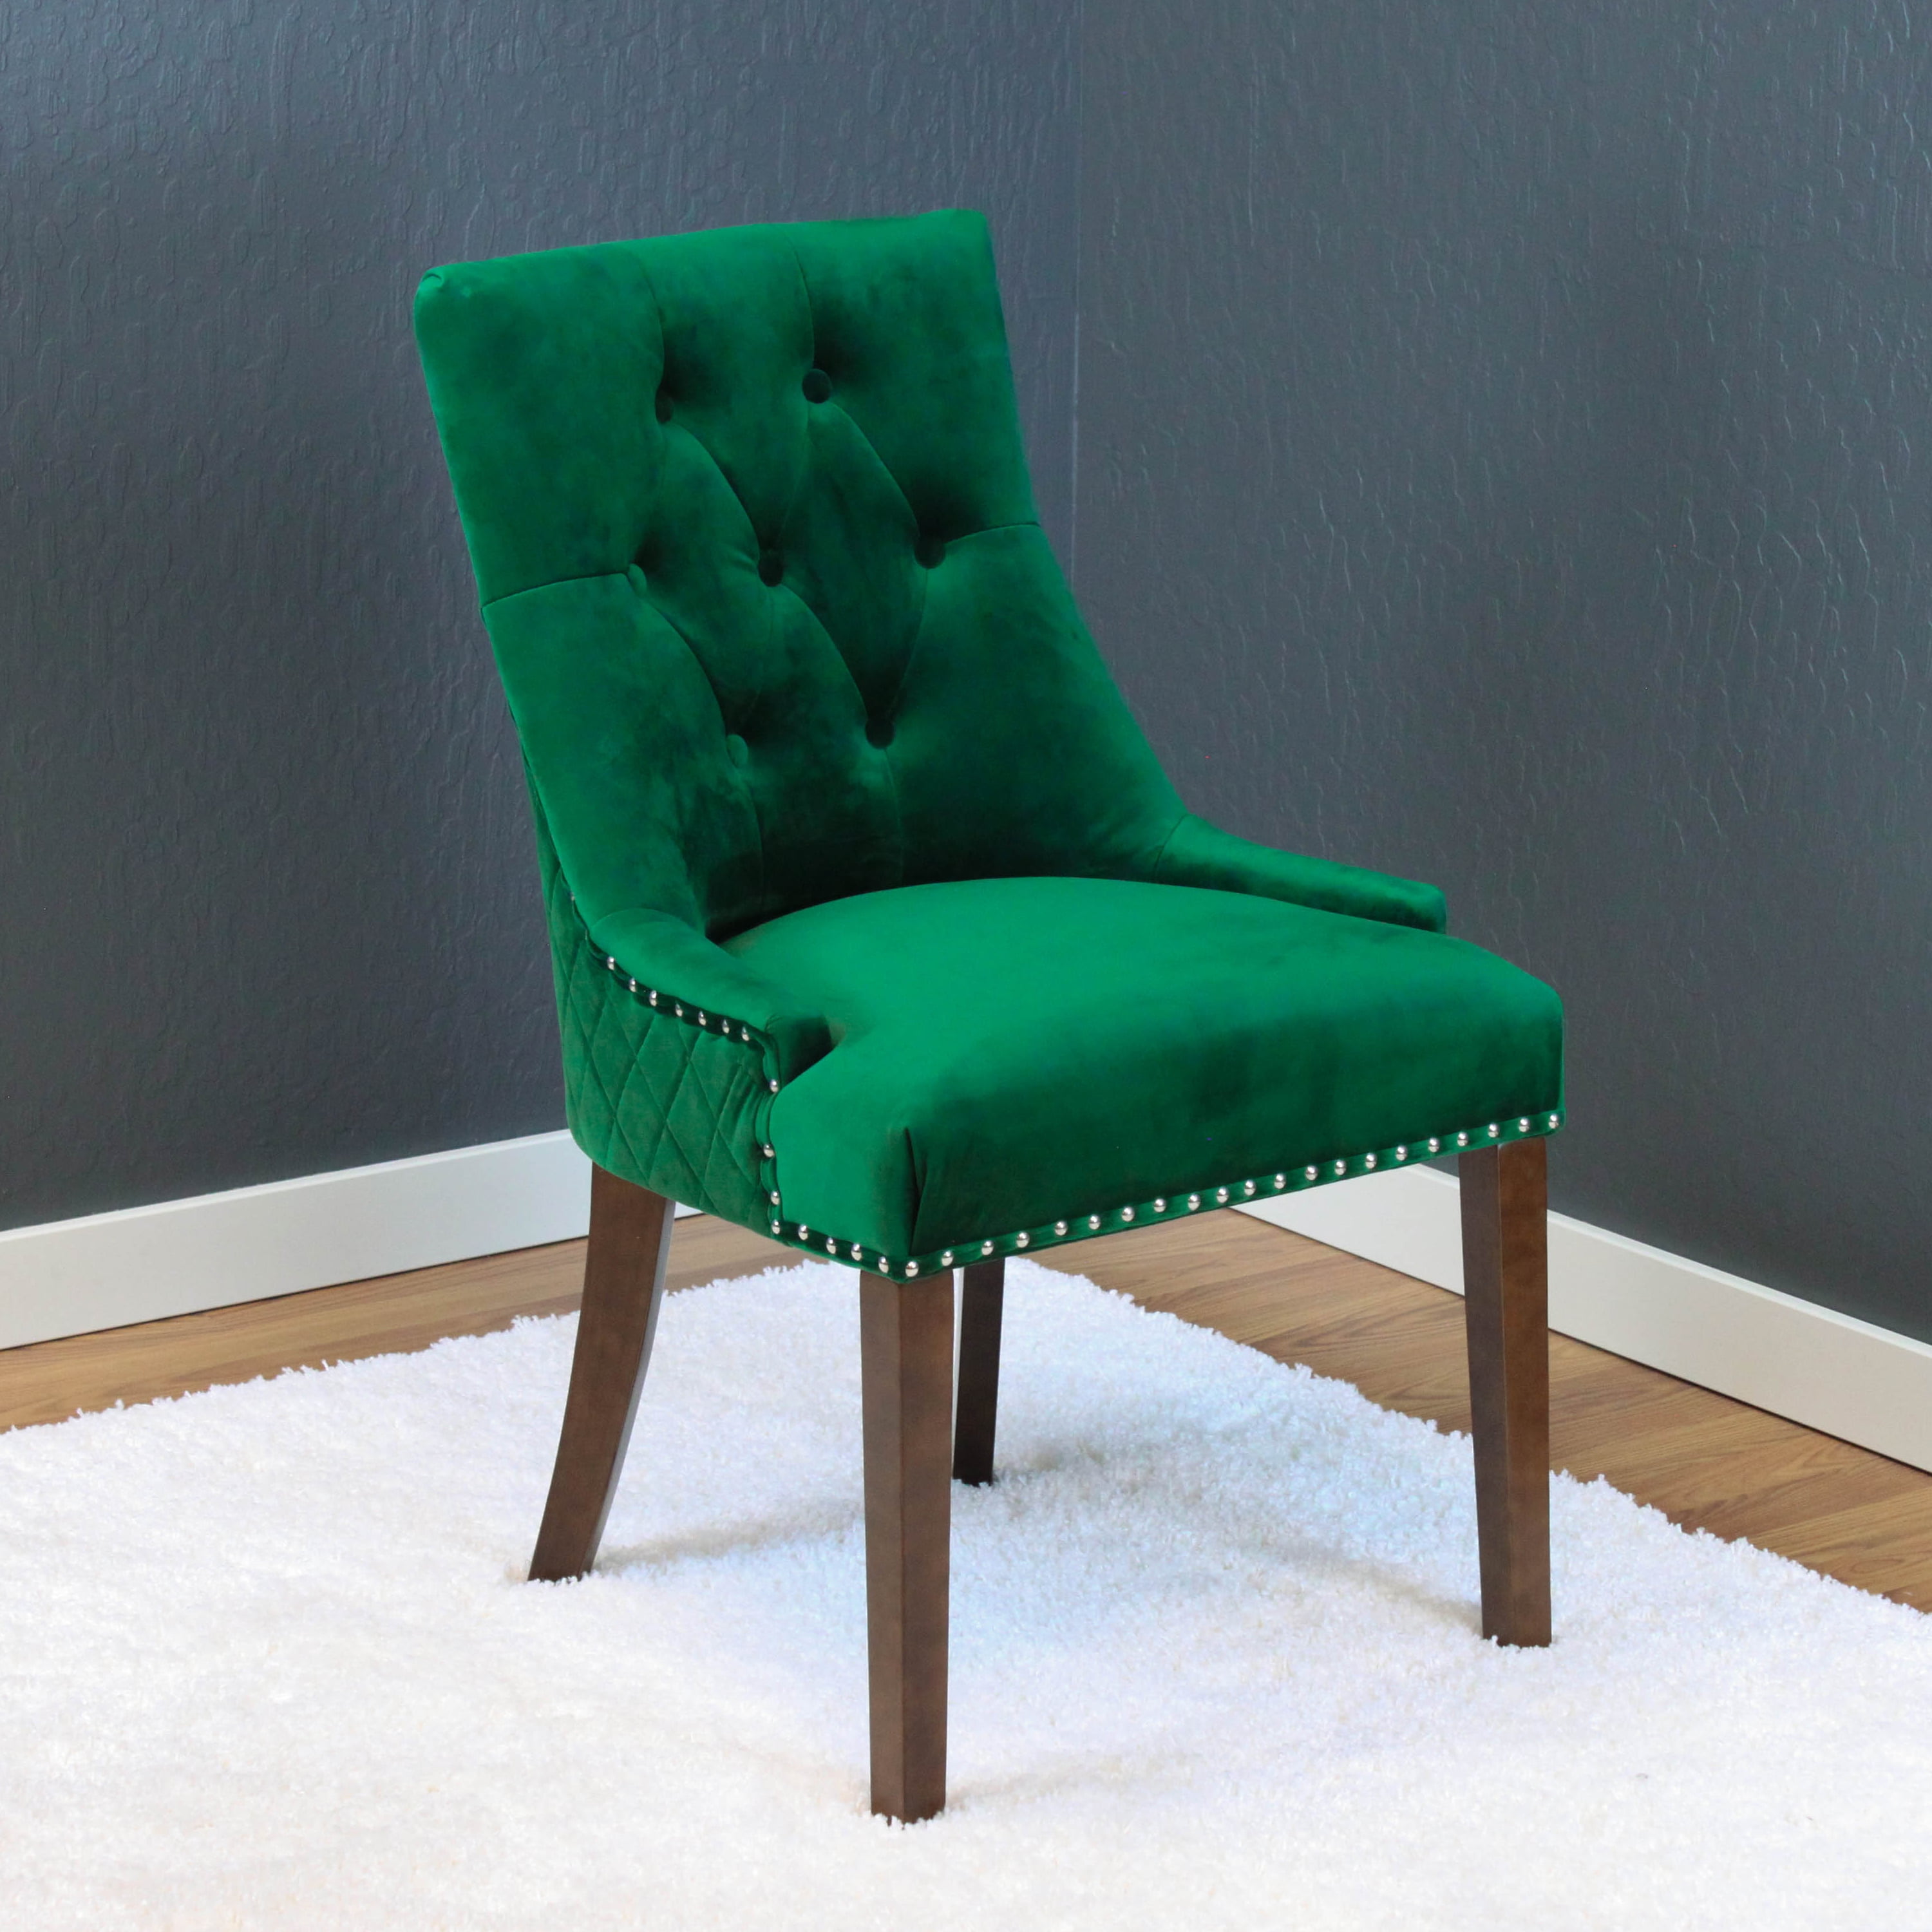 Green Tufted Dining Chair Off 64, Green Upholstered Dining Room Chairs